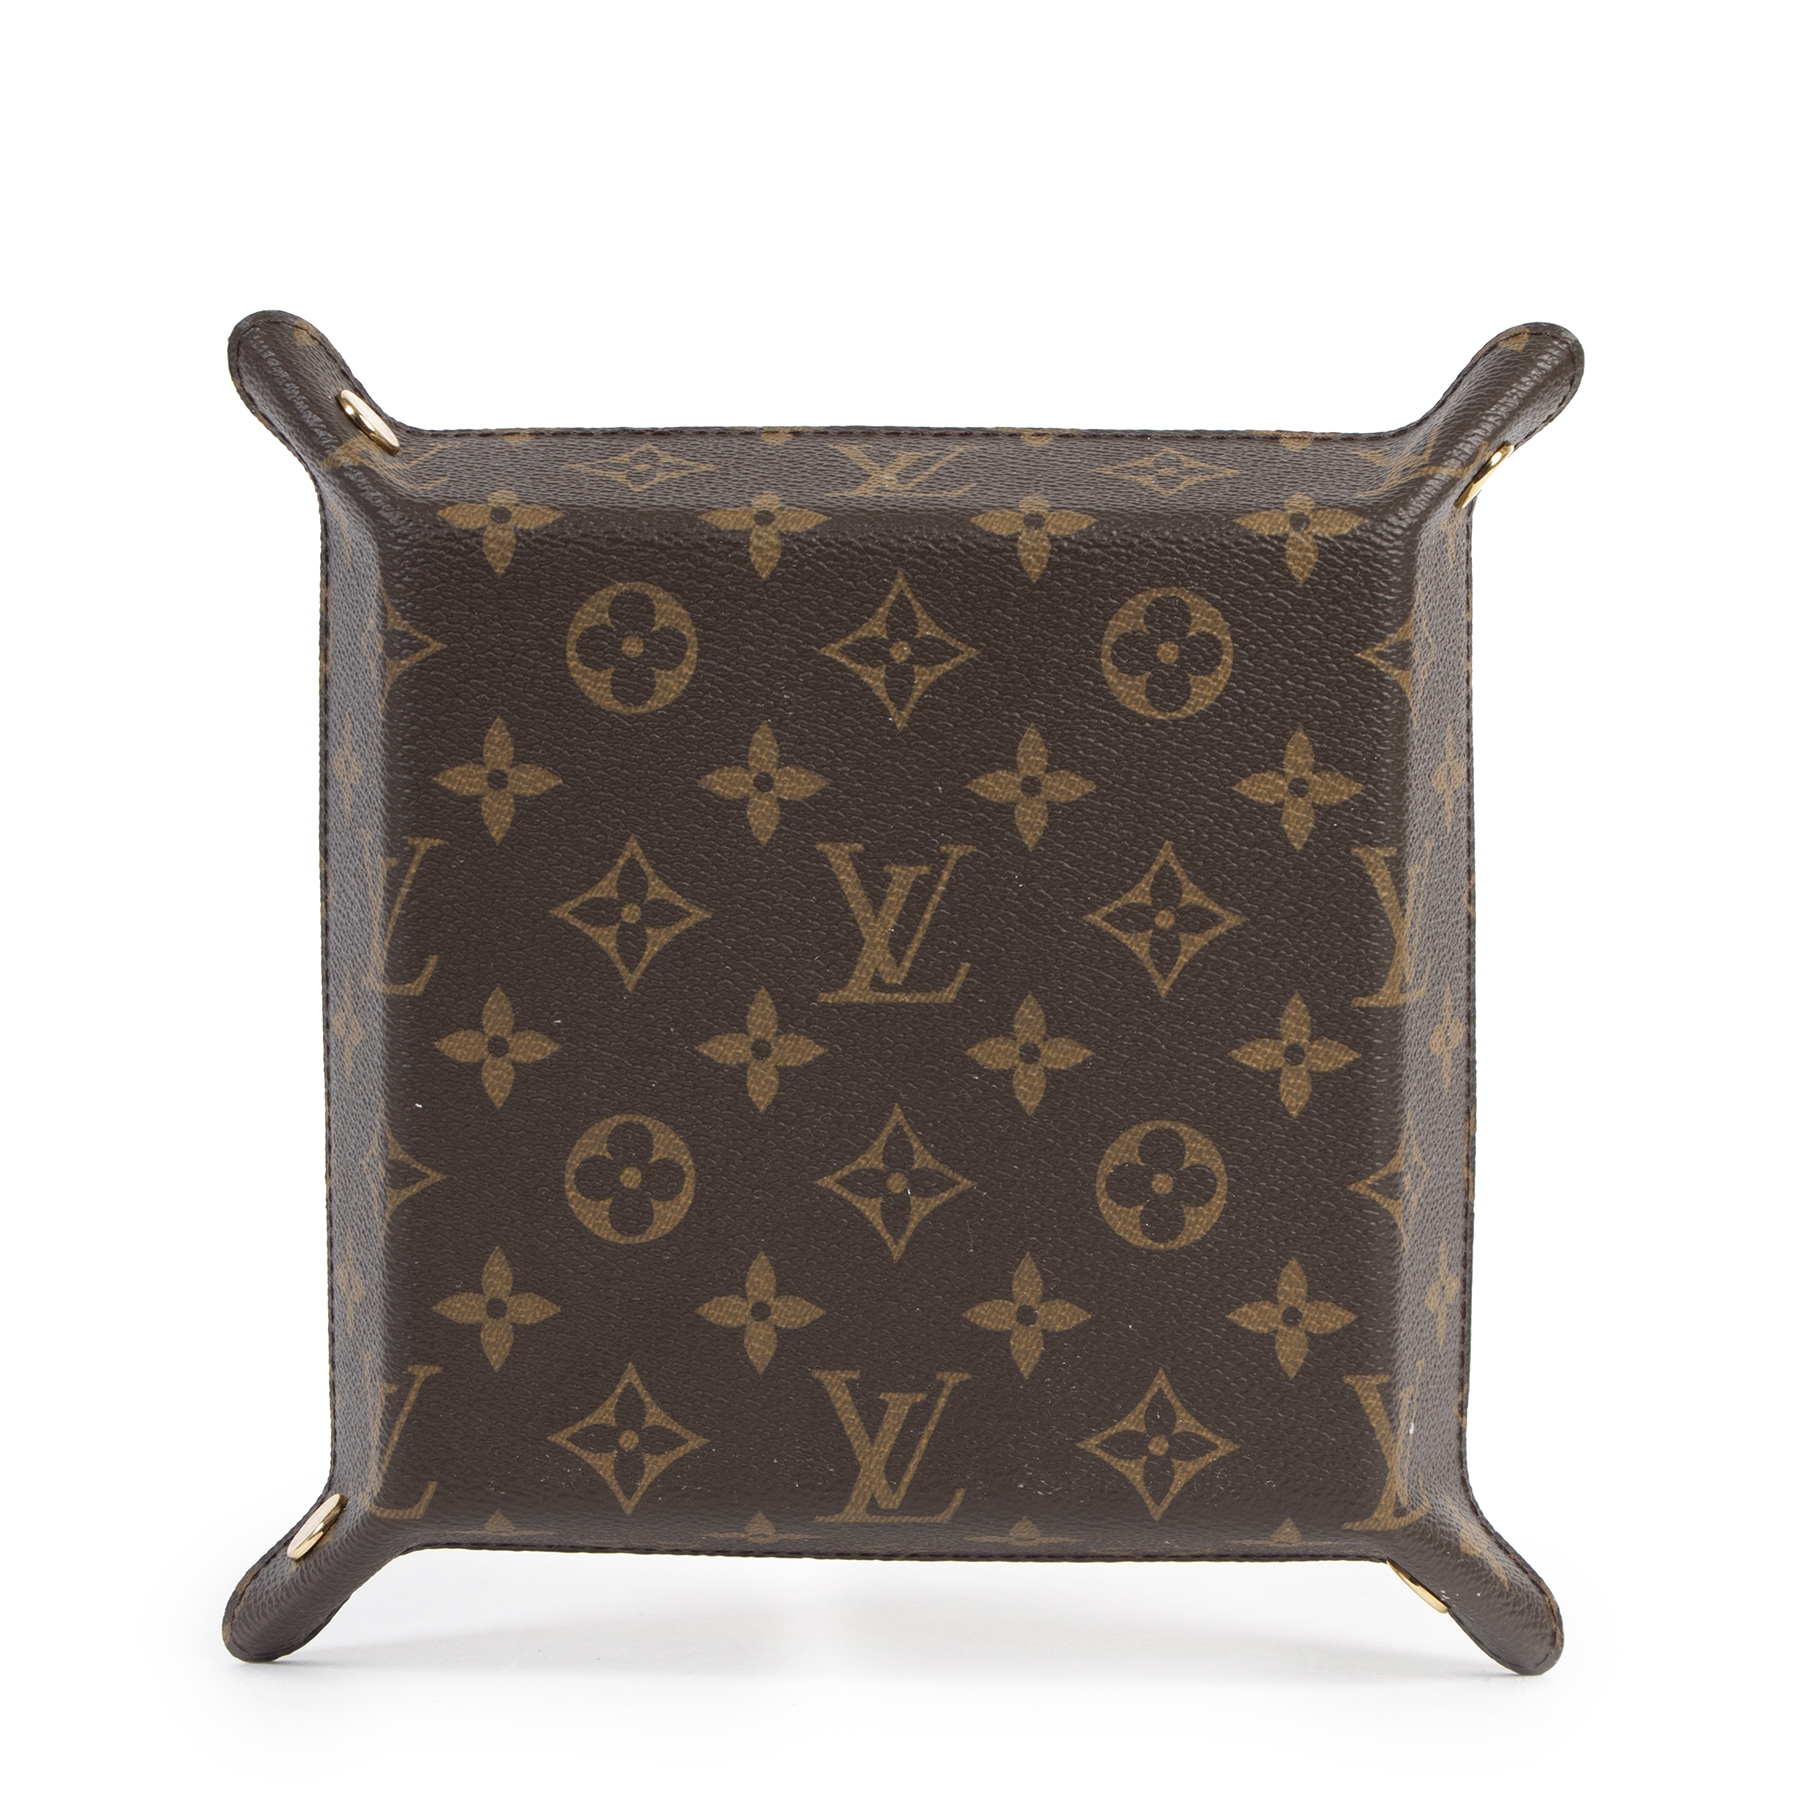 LOUIS VUITTON NEW LIMITED EDITION LEATHER CANVAS VALET TRAY BOWL NEW IN BOX  - AGENT CLOSETEUR